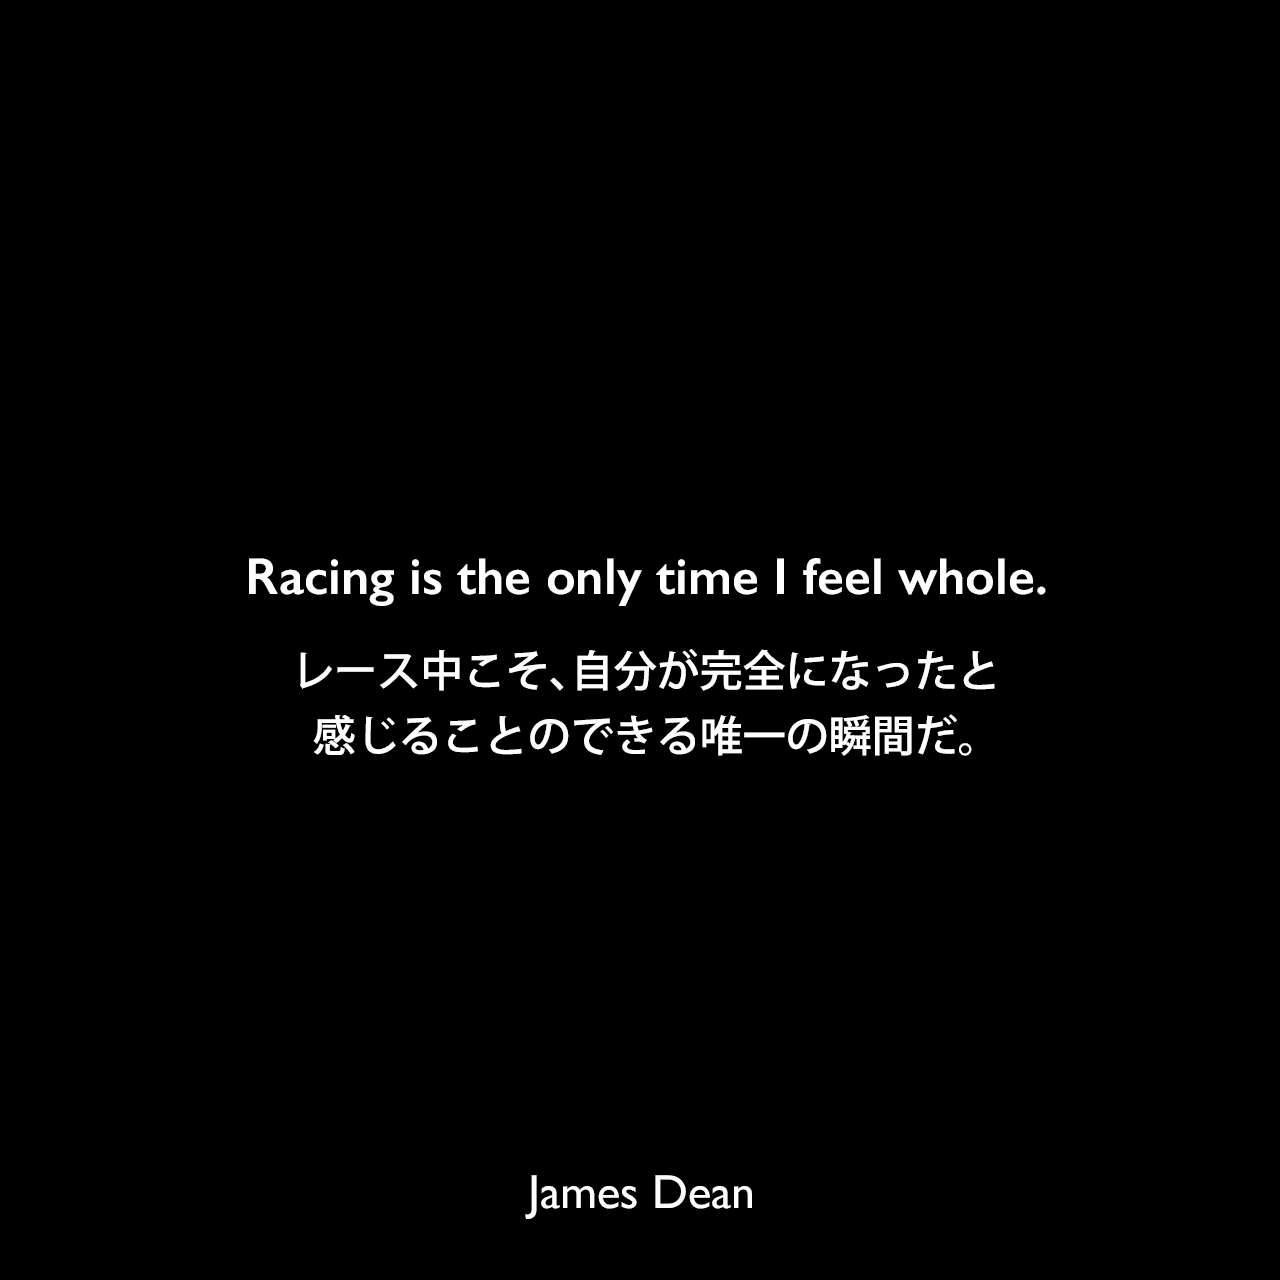 Racing is the only time I feel whole.レース中こそ、自分が完全になったと感じることのできる唯一の瞬間だ。James Dean